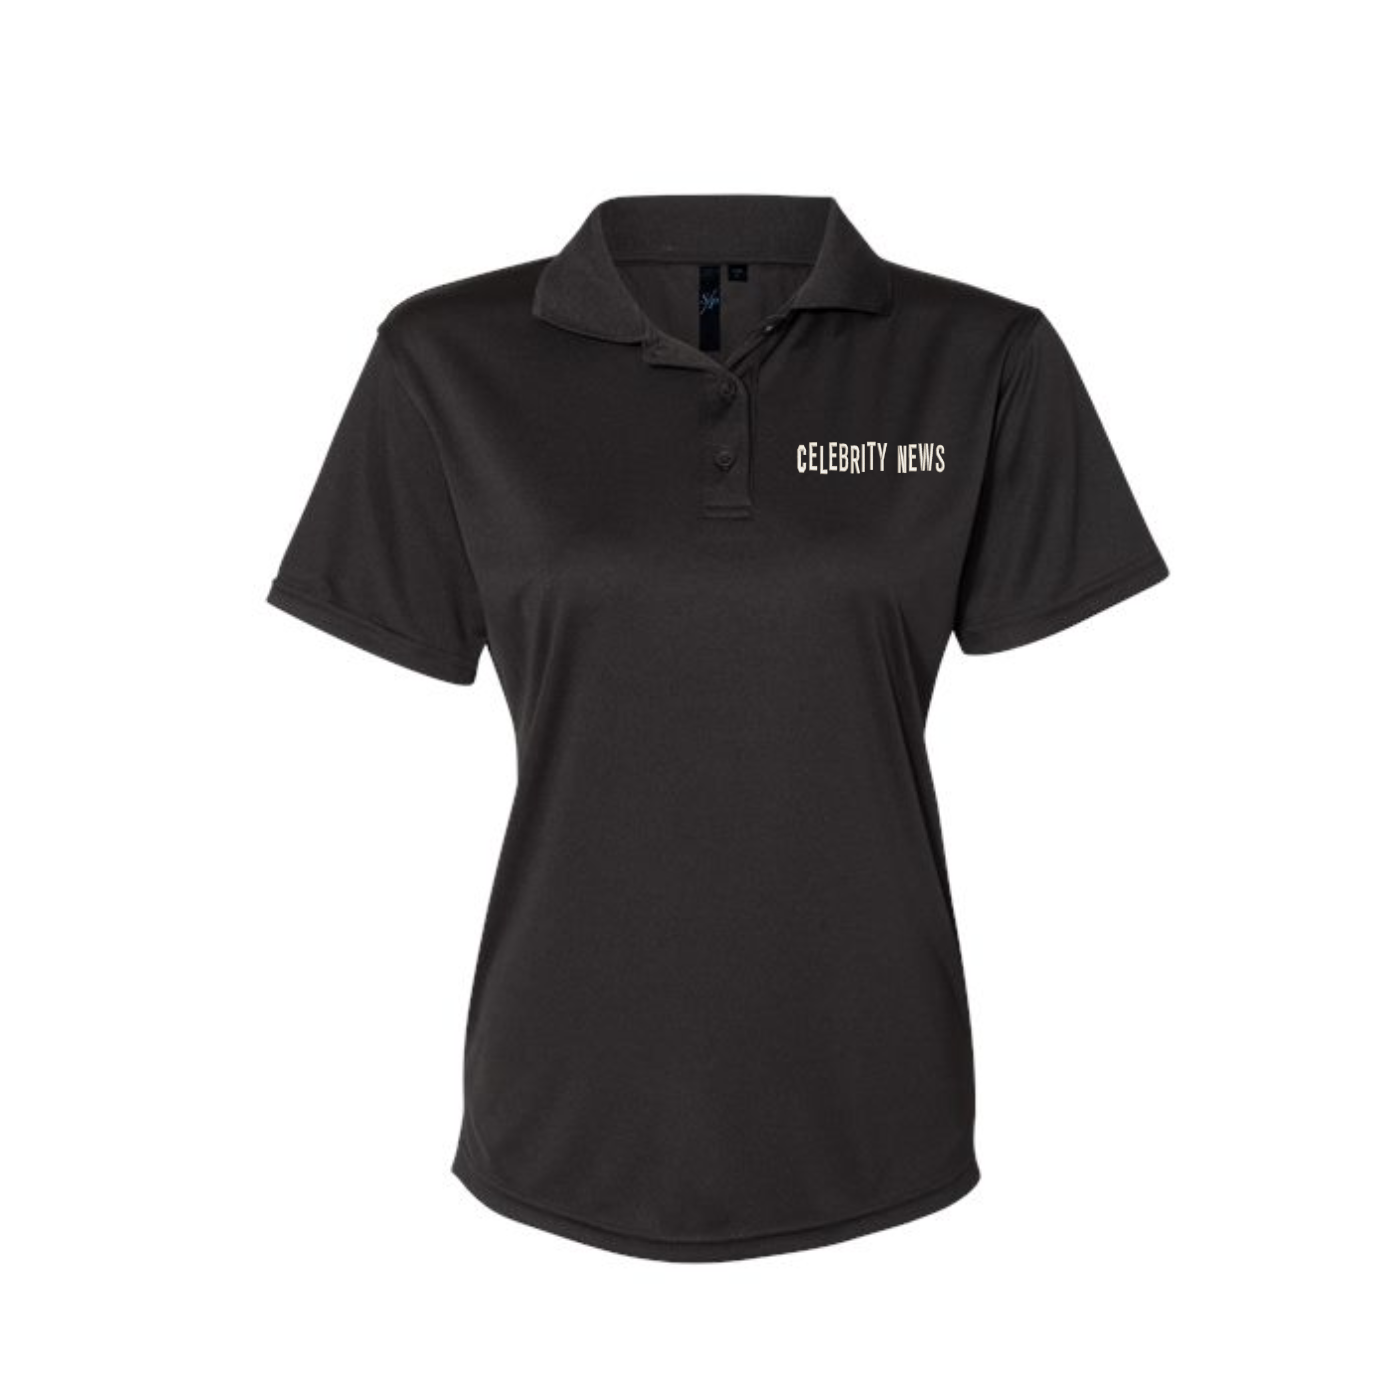 Celebrity News Women's Embroidered Polo Shirt